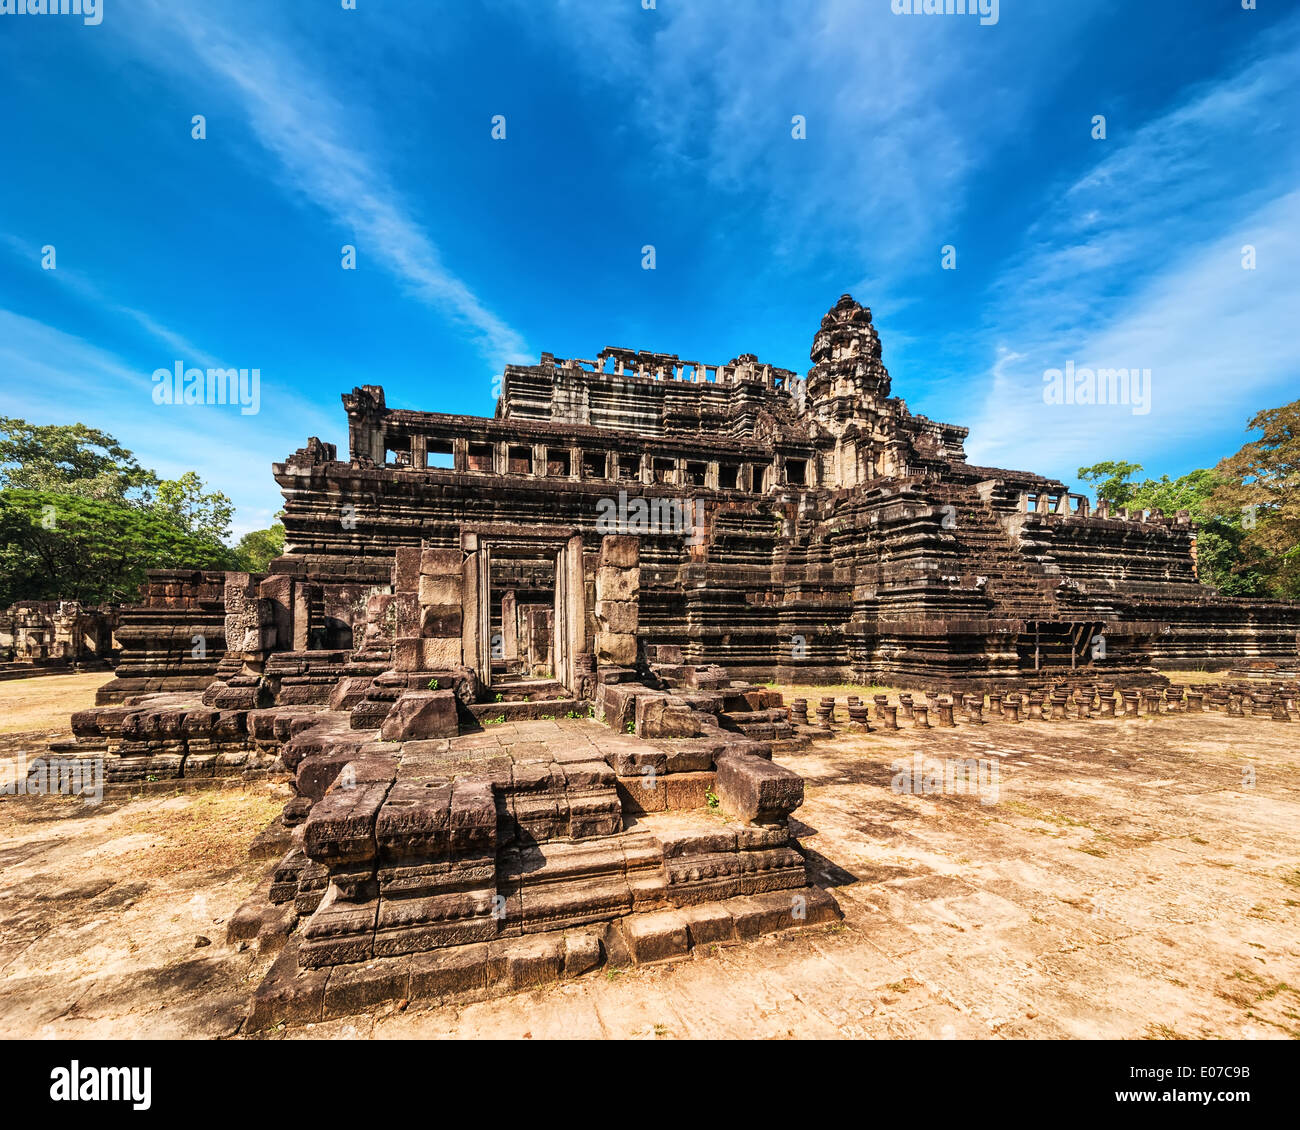 Ancient Khmer architecture. Panorama view of Baphuon temple at Angkor Wat complex, Siem Reap, Cambodia Stock Photo